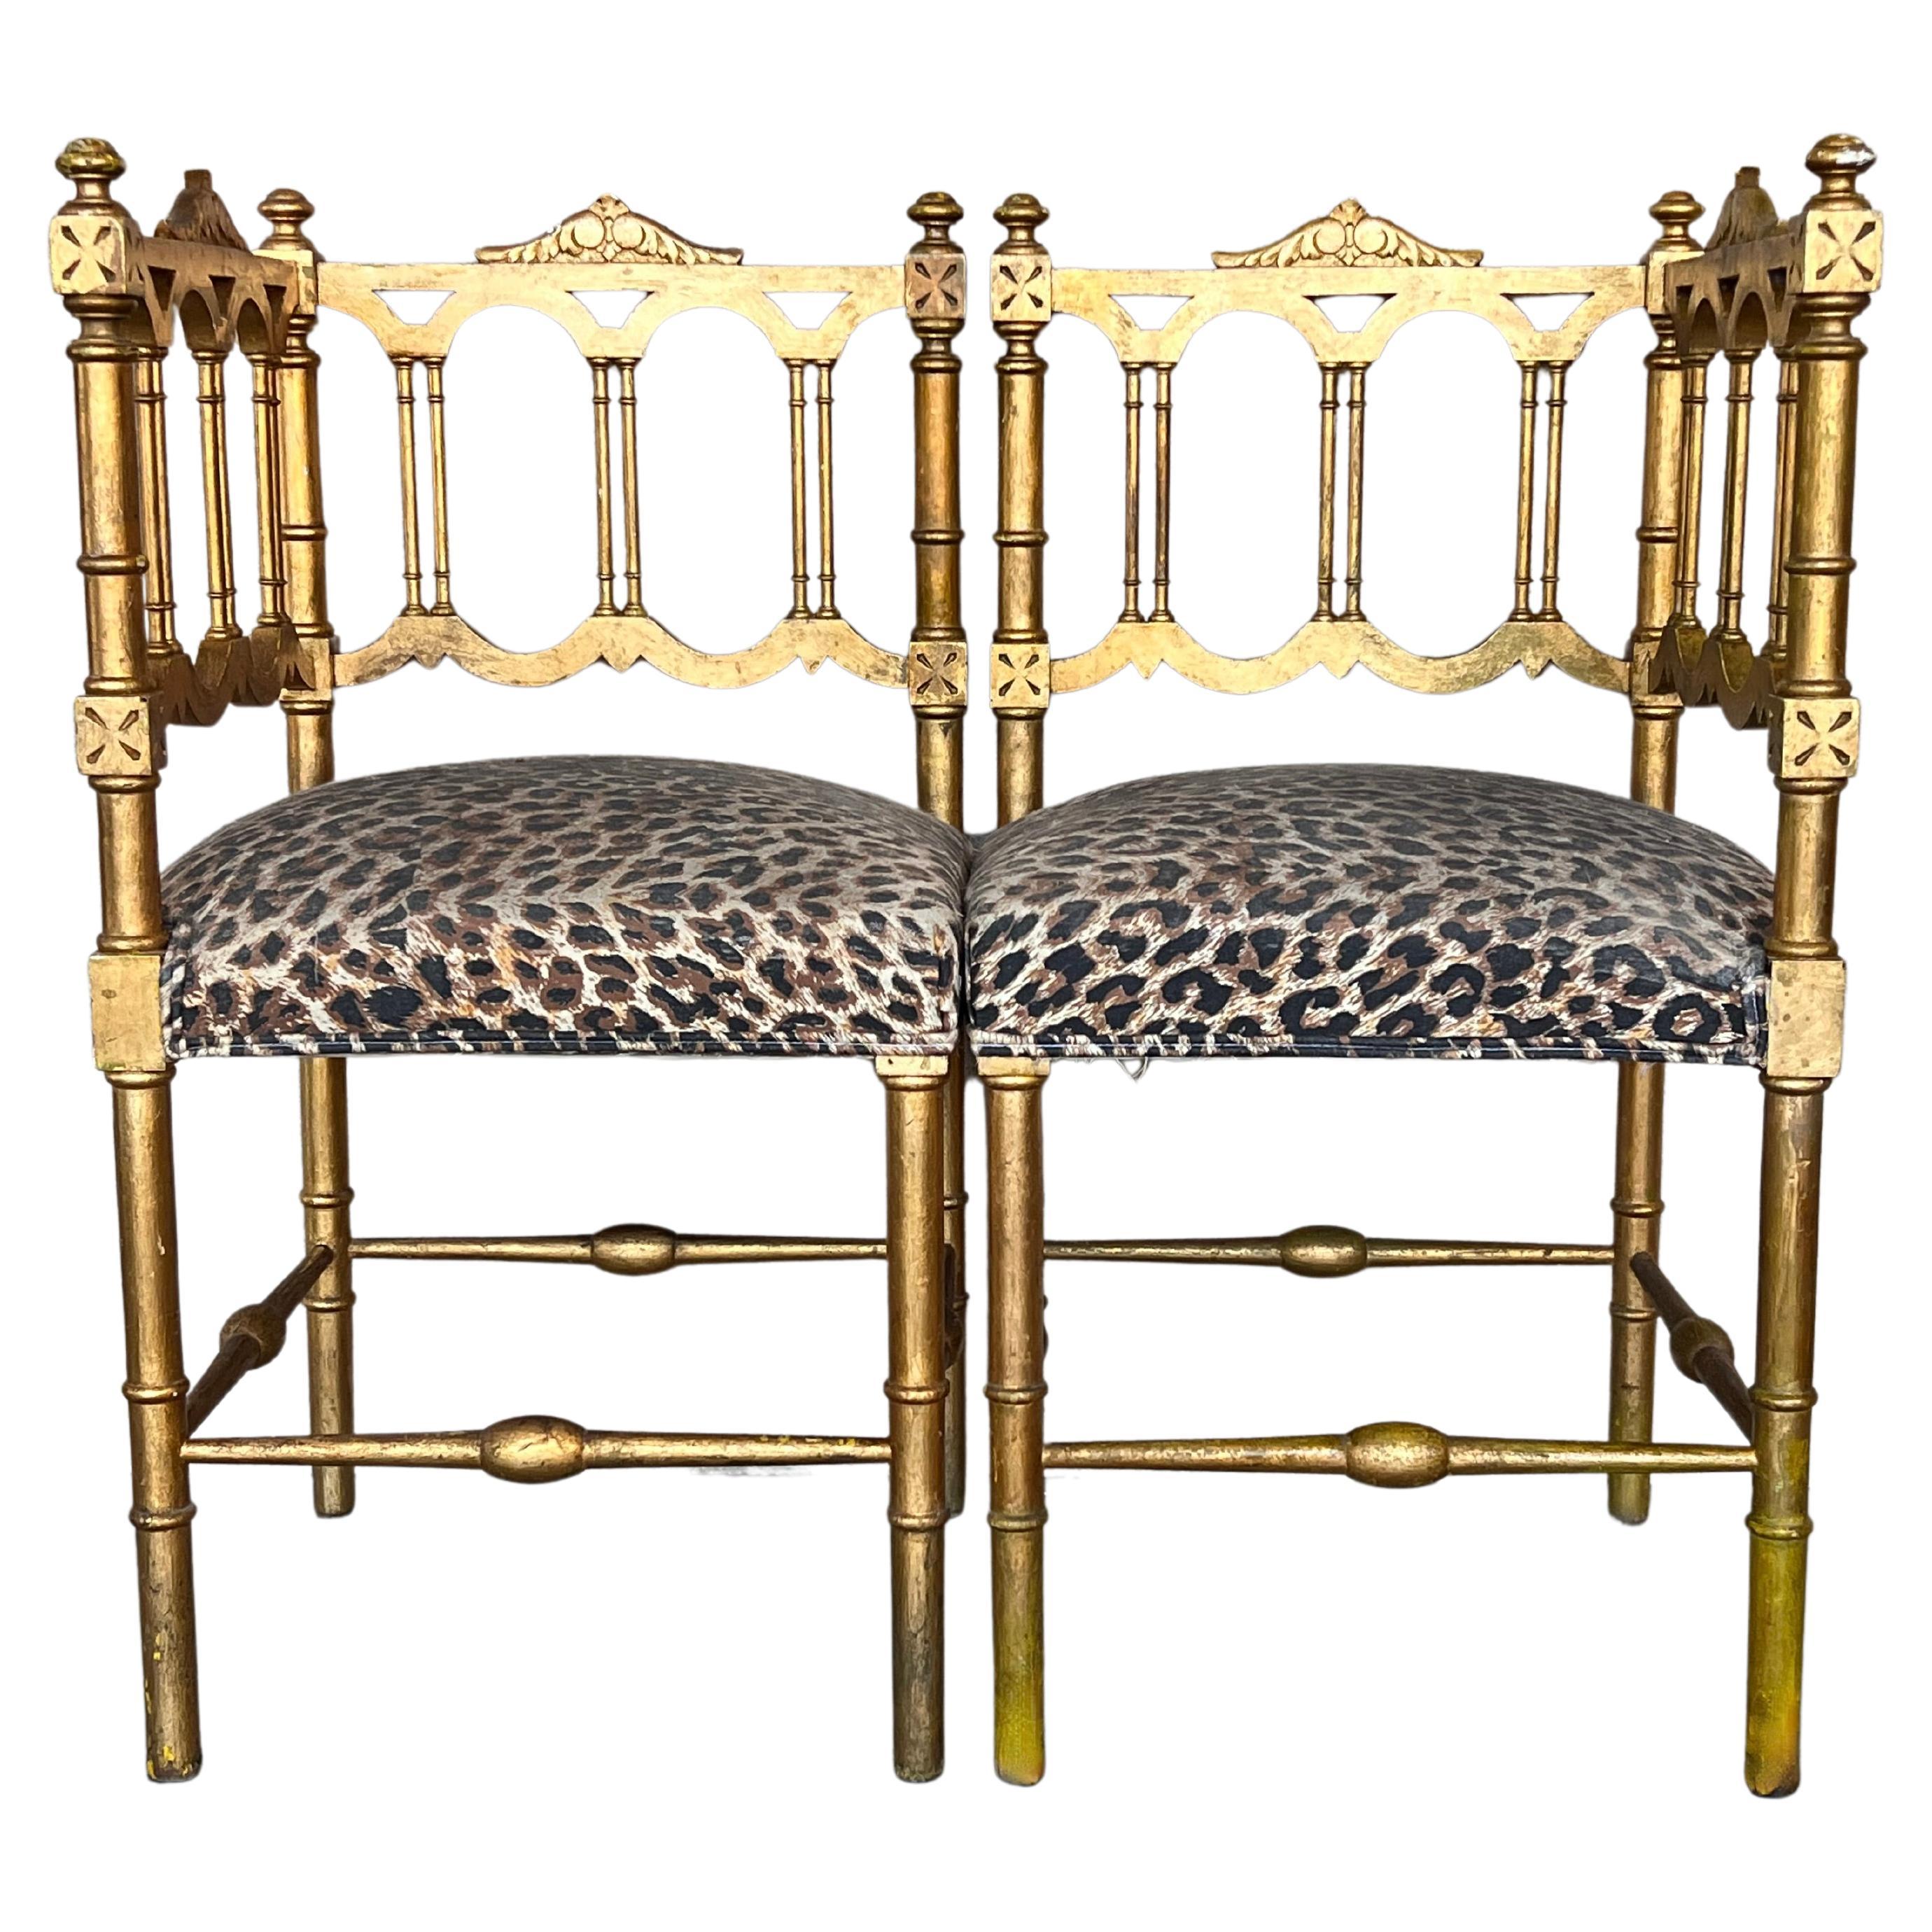 Pair of French Provincial gilded Wood Corner Chairs, circa 1900